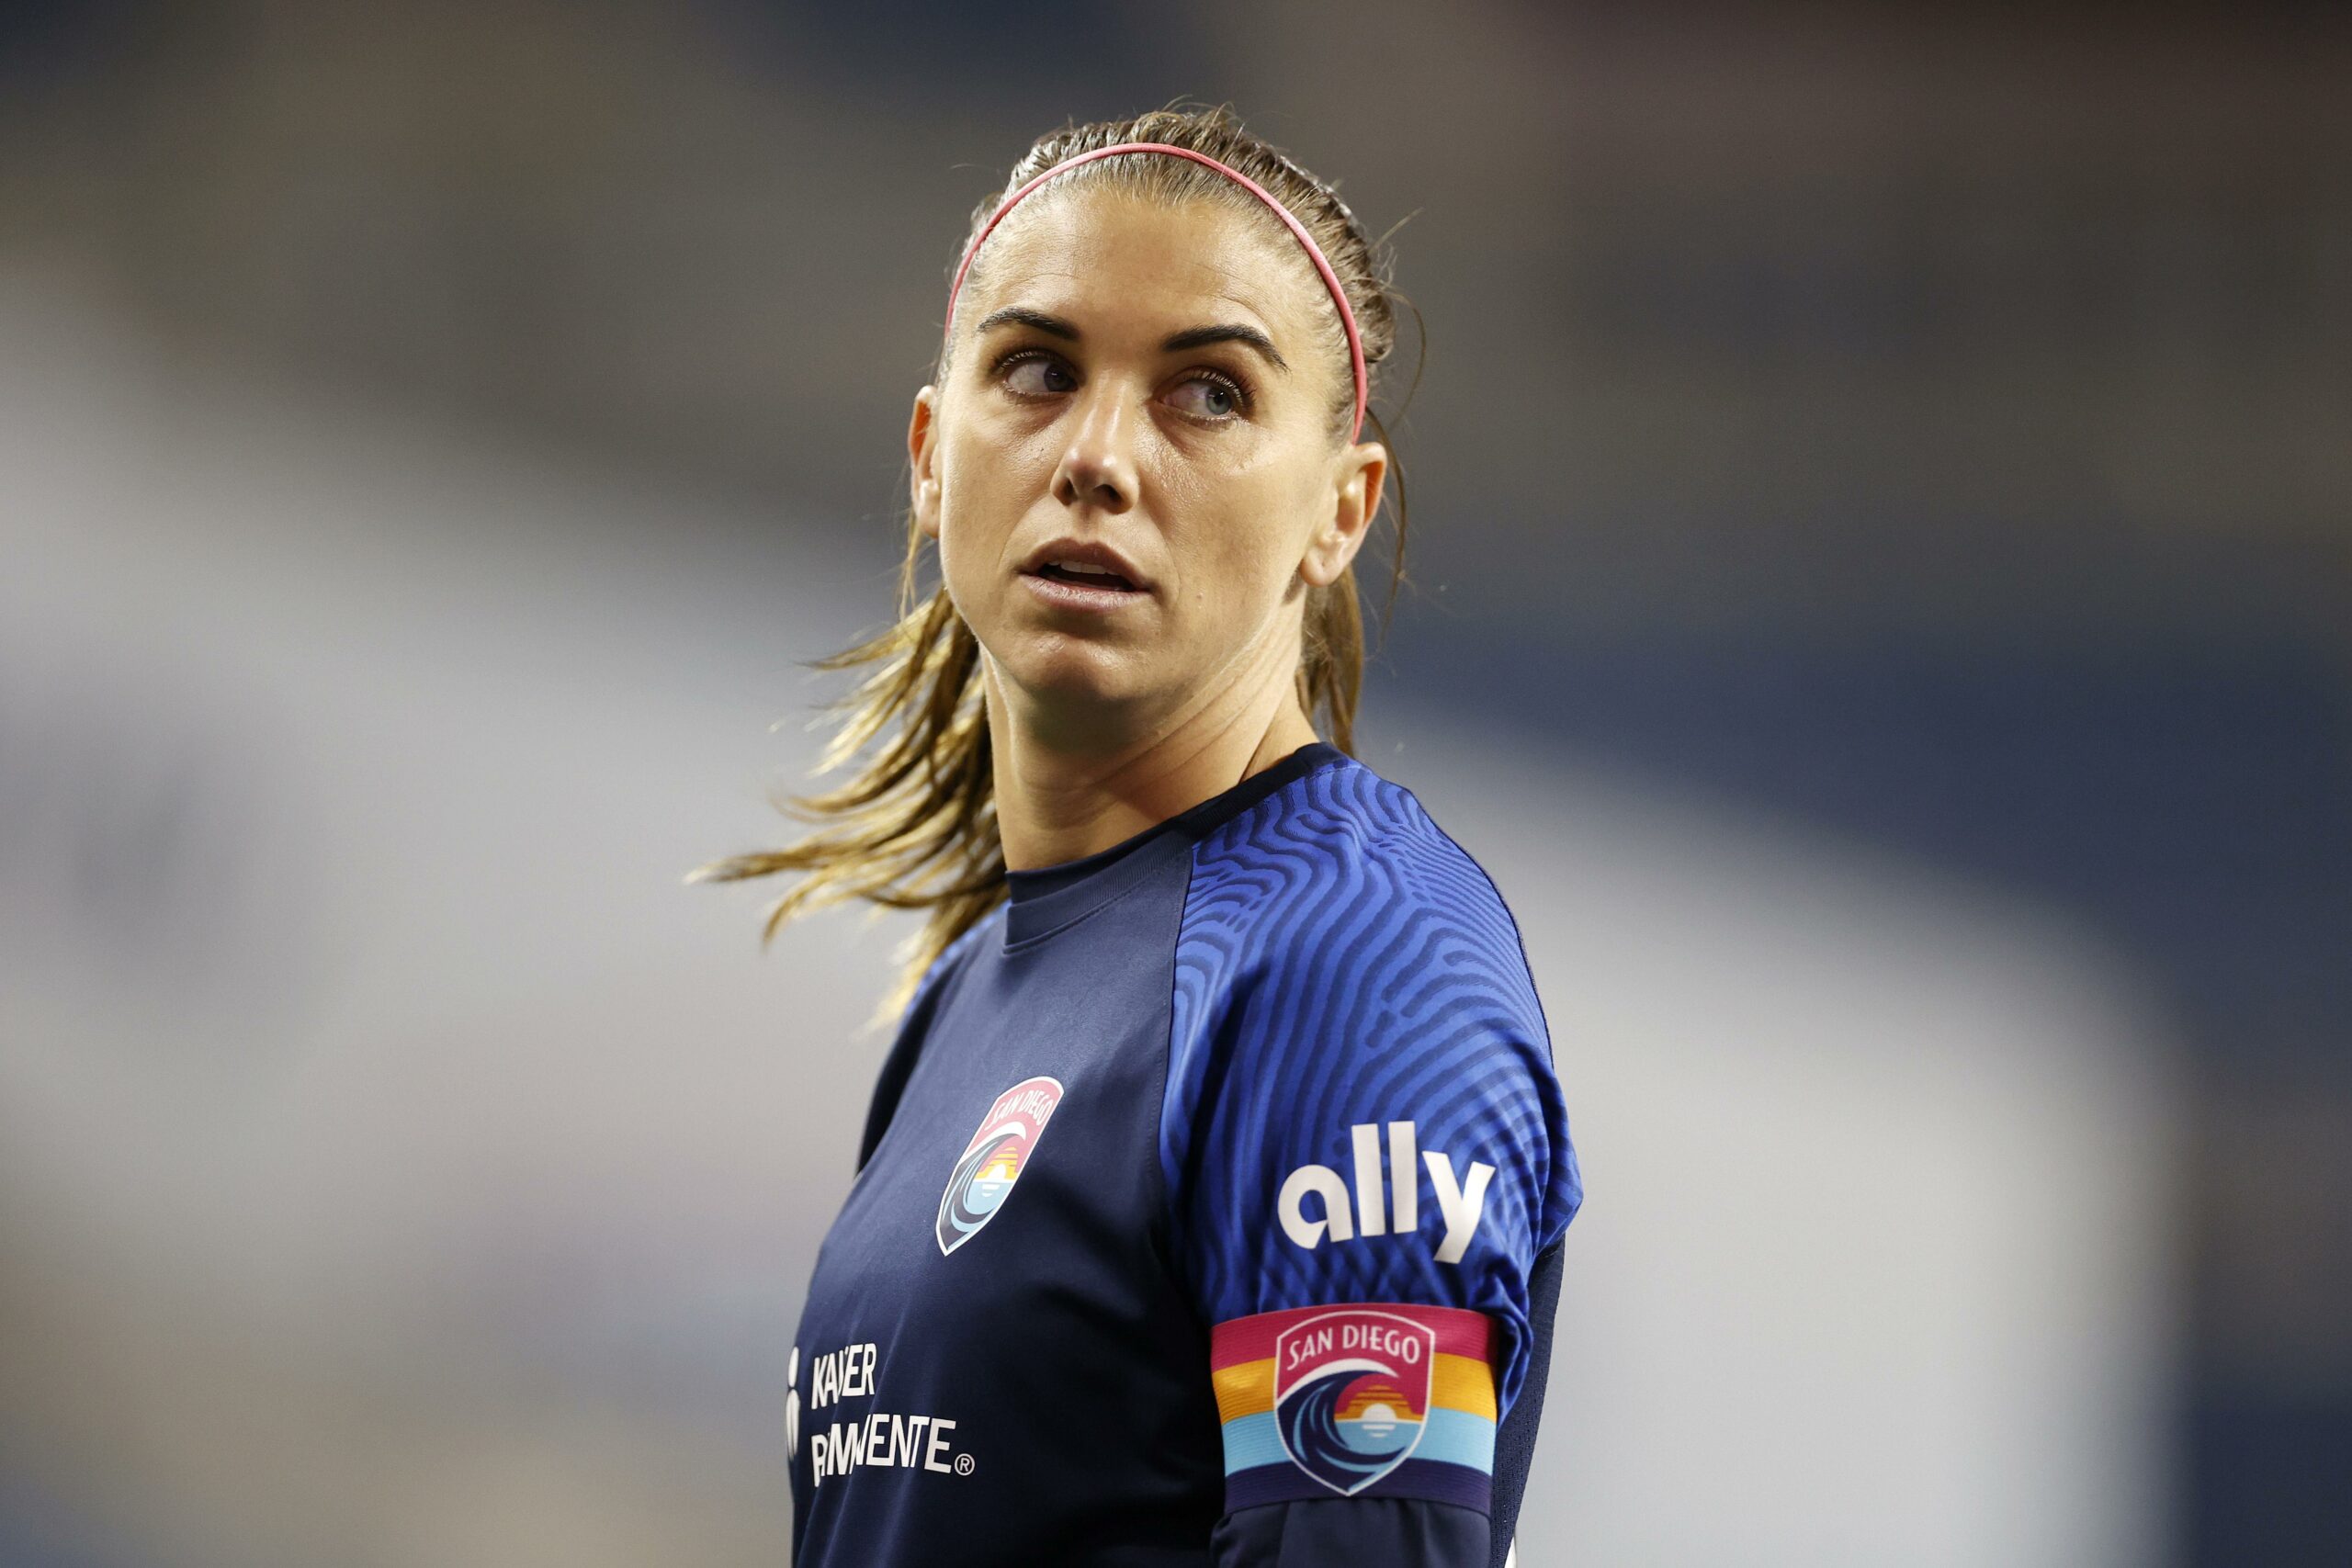 An Inside Look at NWSL Salaries: Women’s Soccer Players Making Strides